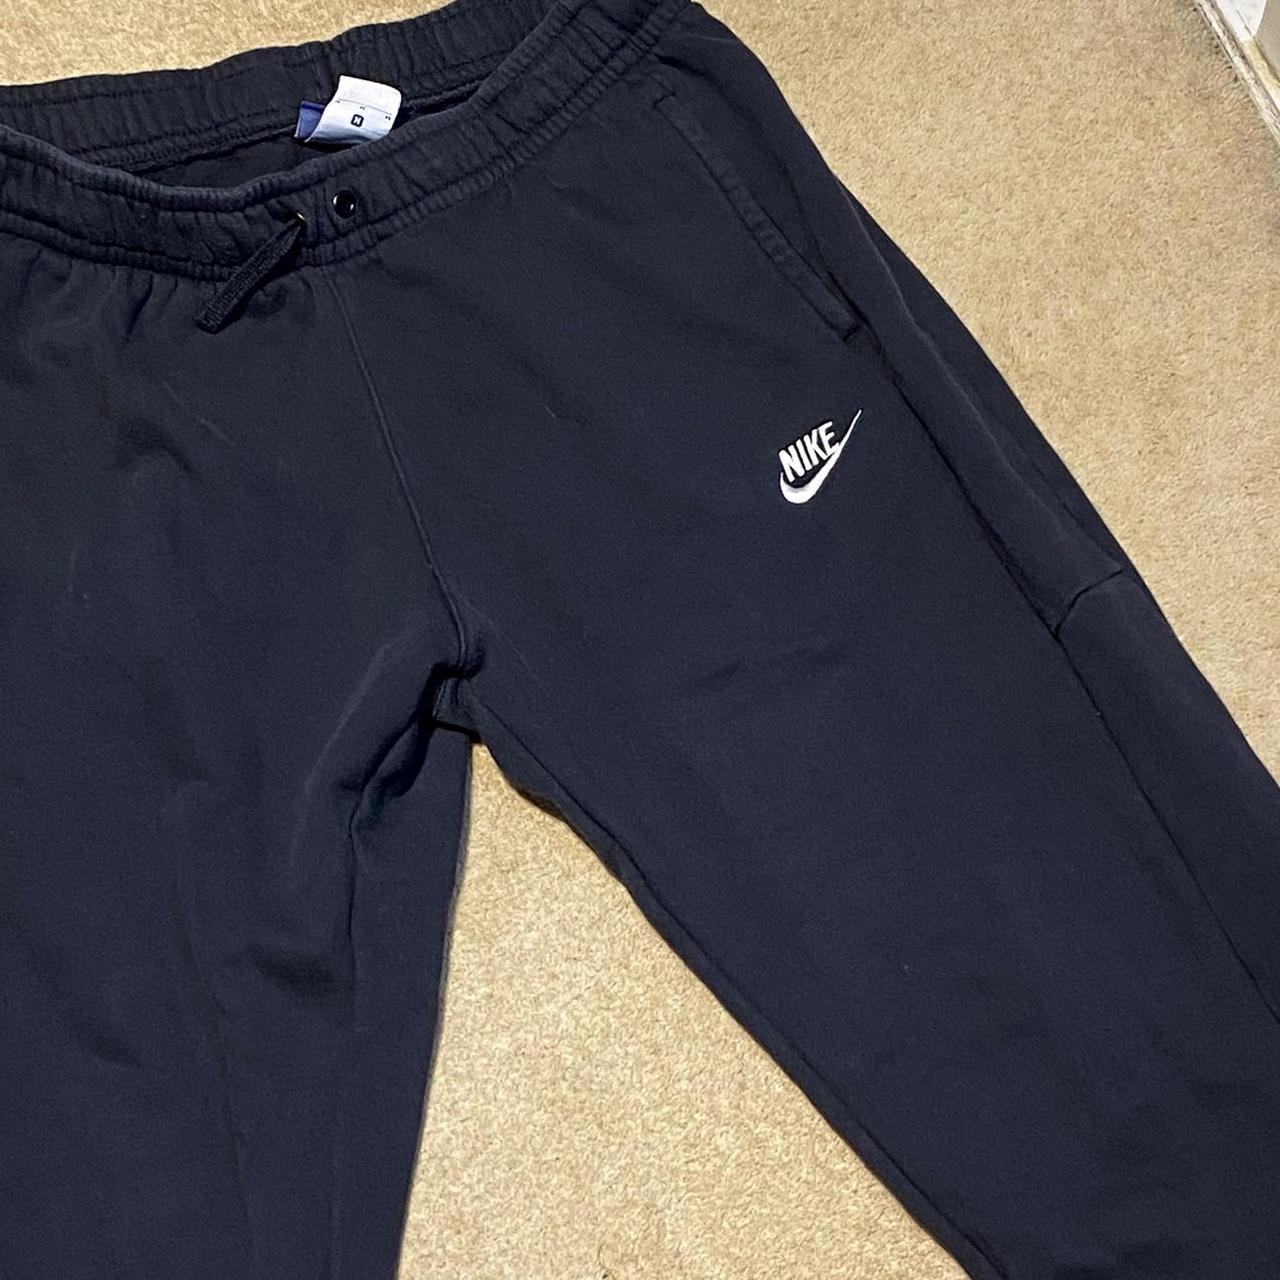 Nike Men's White and Black Joggers-tracksuits | Depop